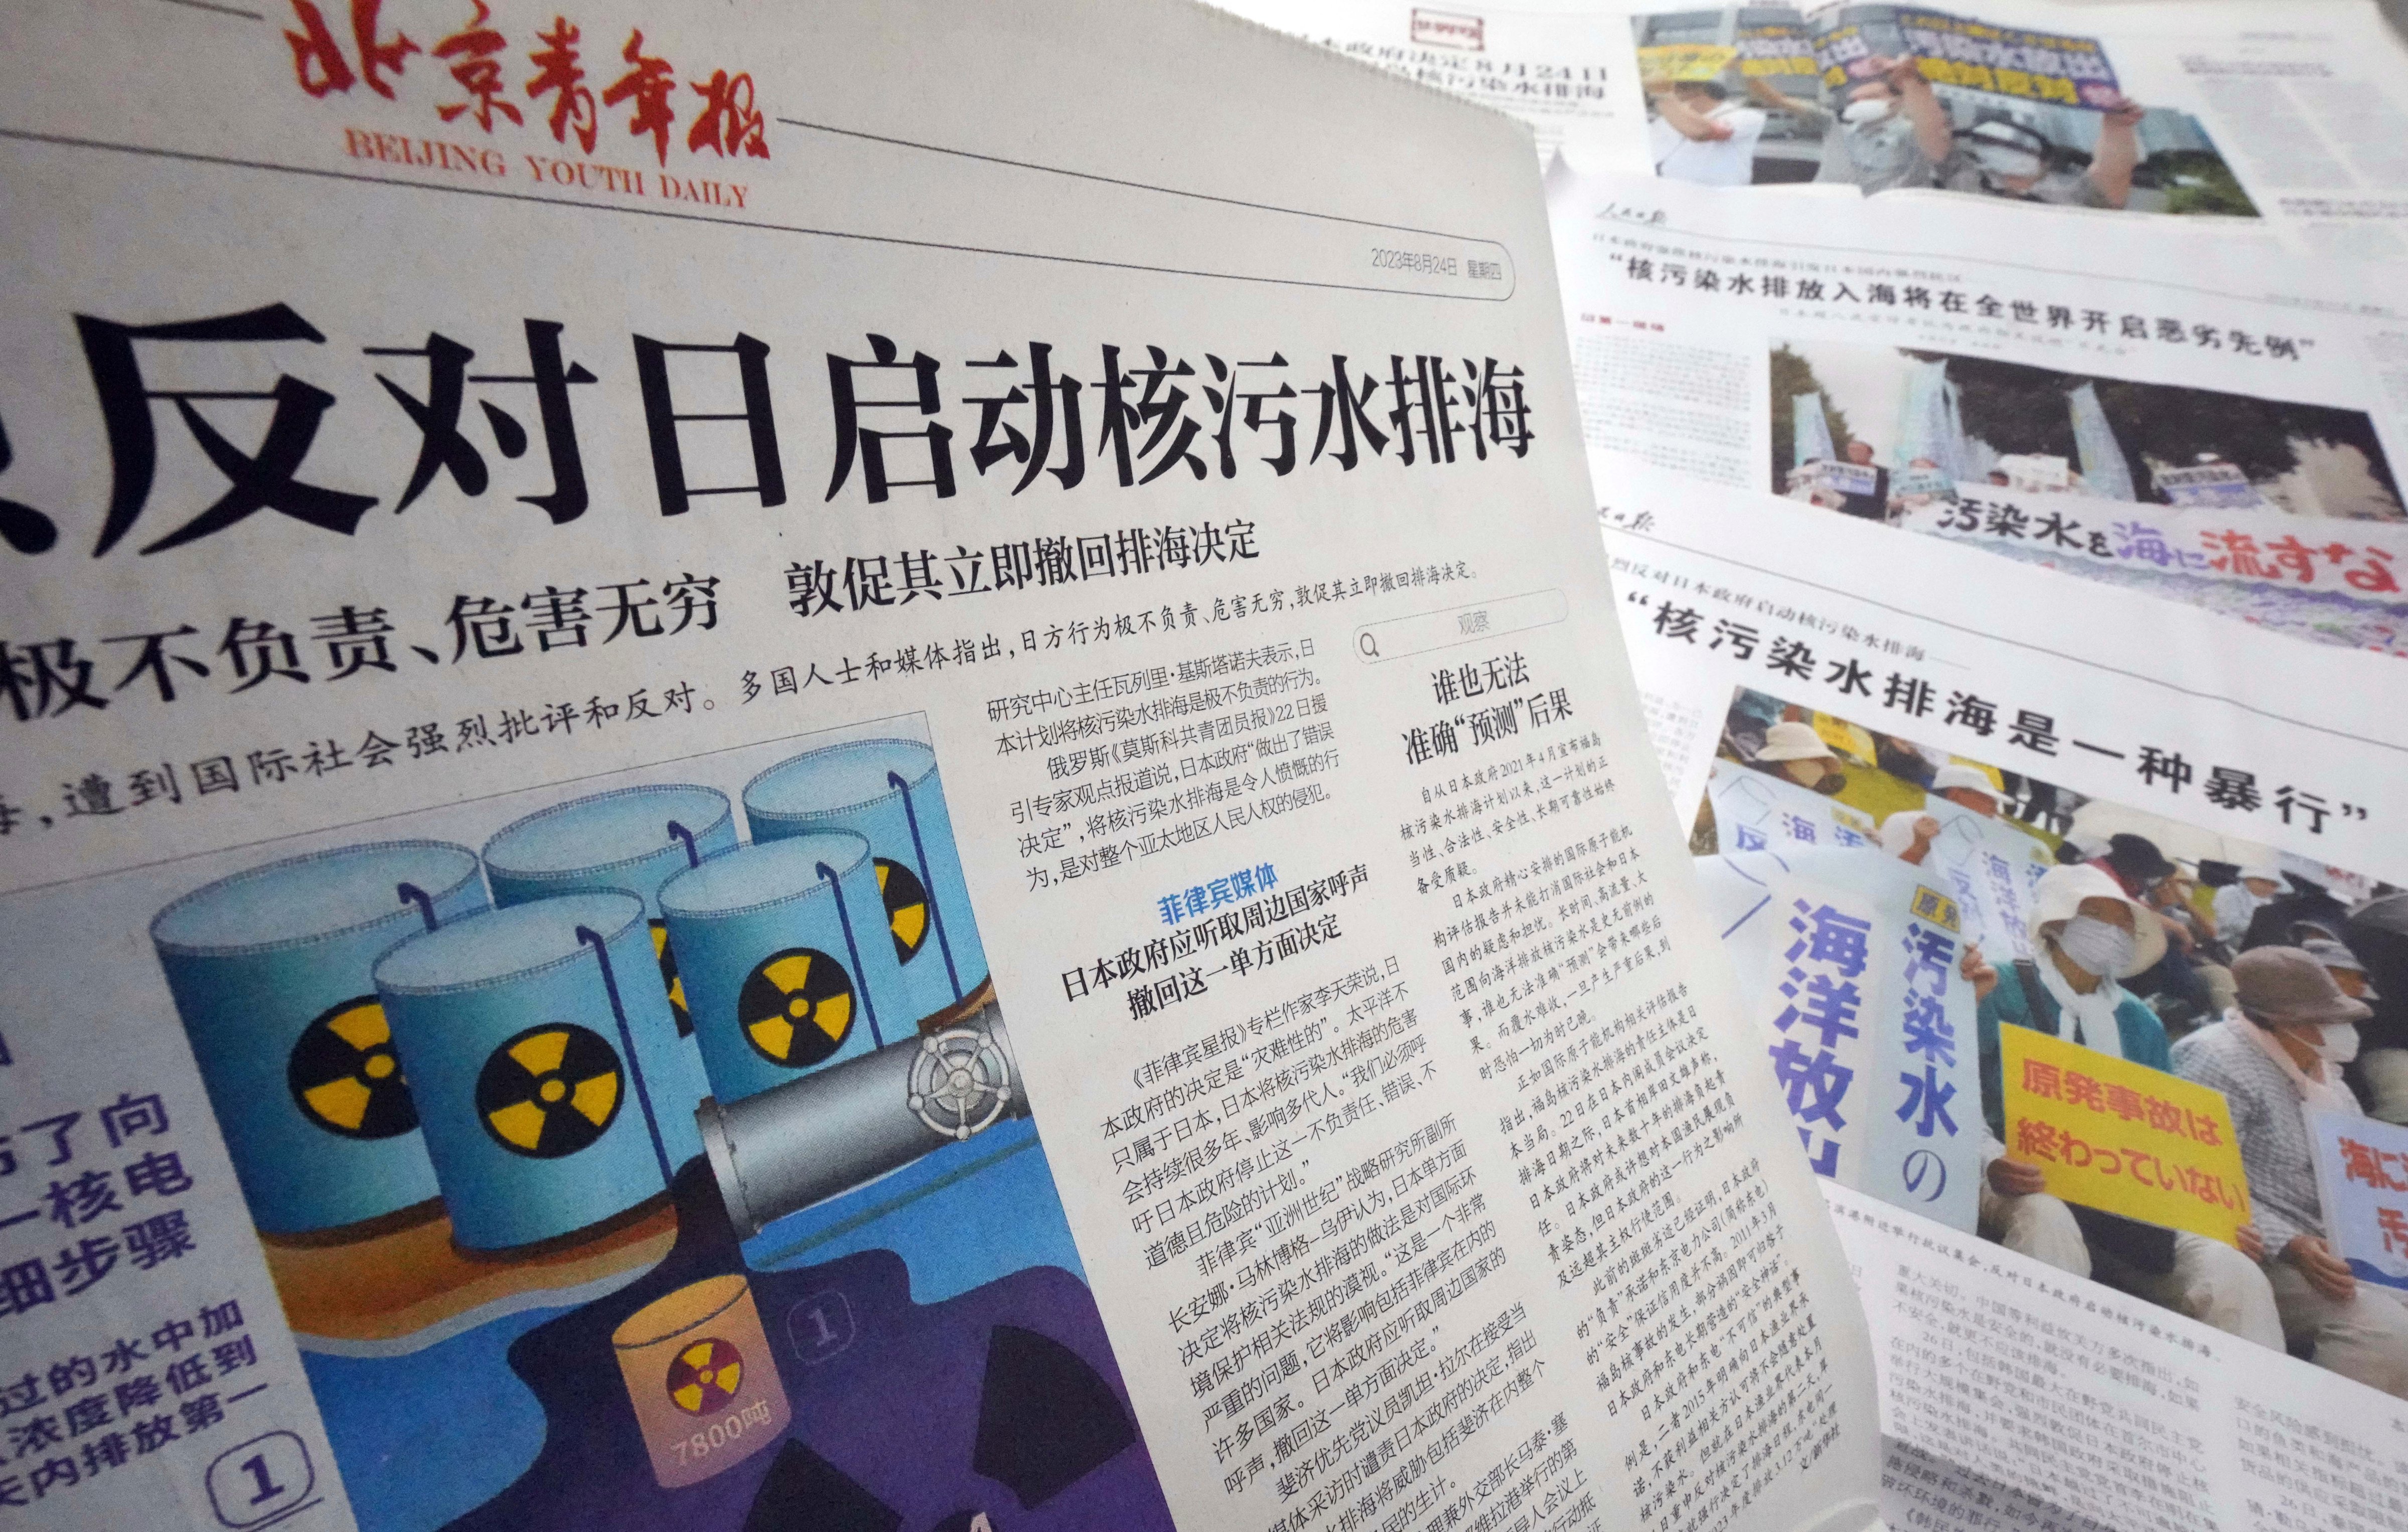 Chinese newspapers report on the release of treated water from the Fukushima nuclear power plant into the Pacific, describing the discharge as "extremely irresponsible" and "an atrocity," in Beijing on Aug. 30, 2023. (Yomiuri Shimbun/AP)